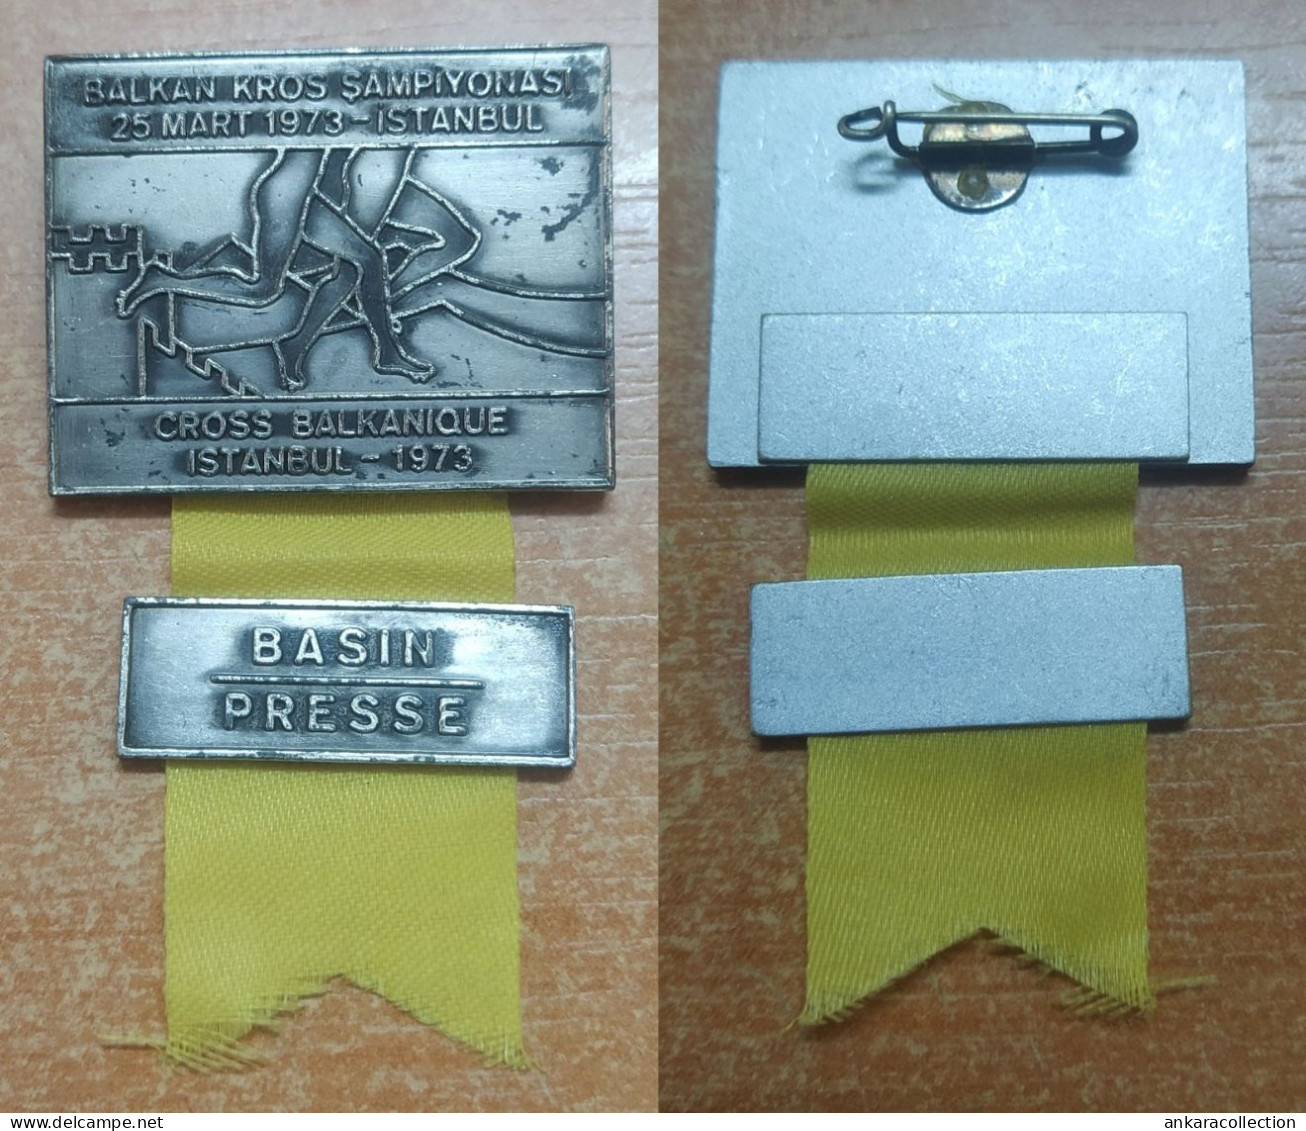 AC -  BALKAN CROSS COUNTRY CHAMPIONSHIPS 25 MARCH 1973 ISTANBUL PRESS BADGE PIN - Apparel, Souvenirs & Other